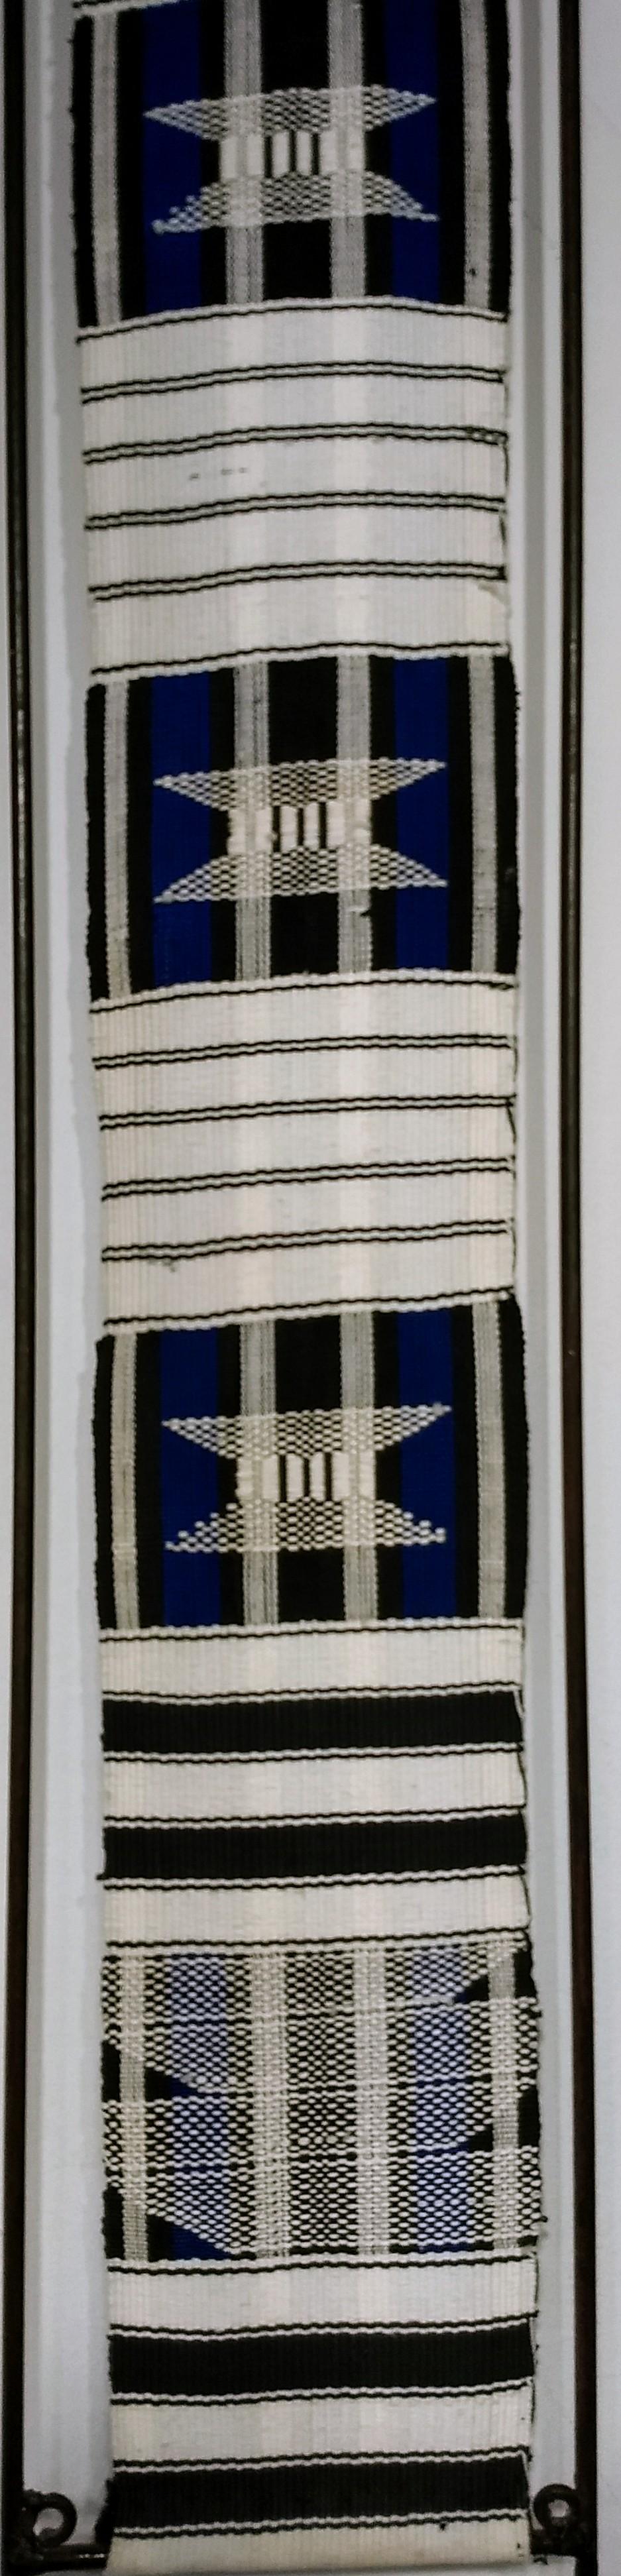 Mid-20th Century African Handwoven Tapestry in Hand-Crafted  Metal Frame in Indigo Blue, White  For Sale